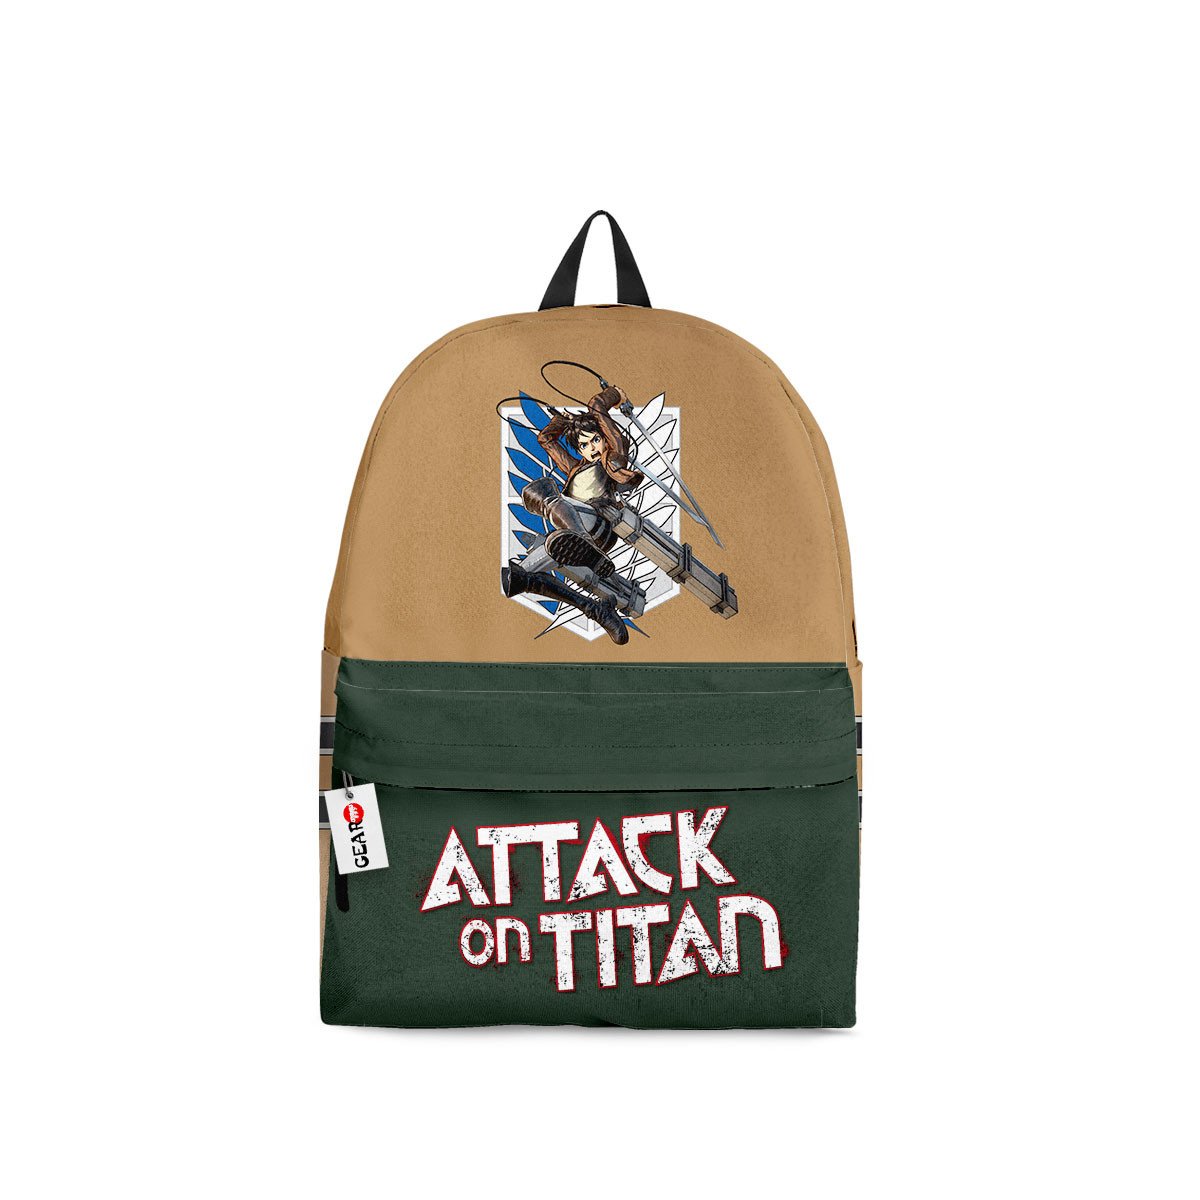 BEST Eren Yeager Attack On Titan Anime Printed 3D Leisure Backpack